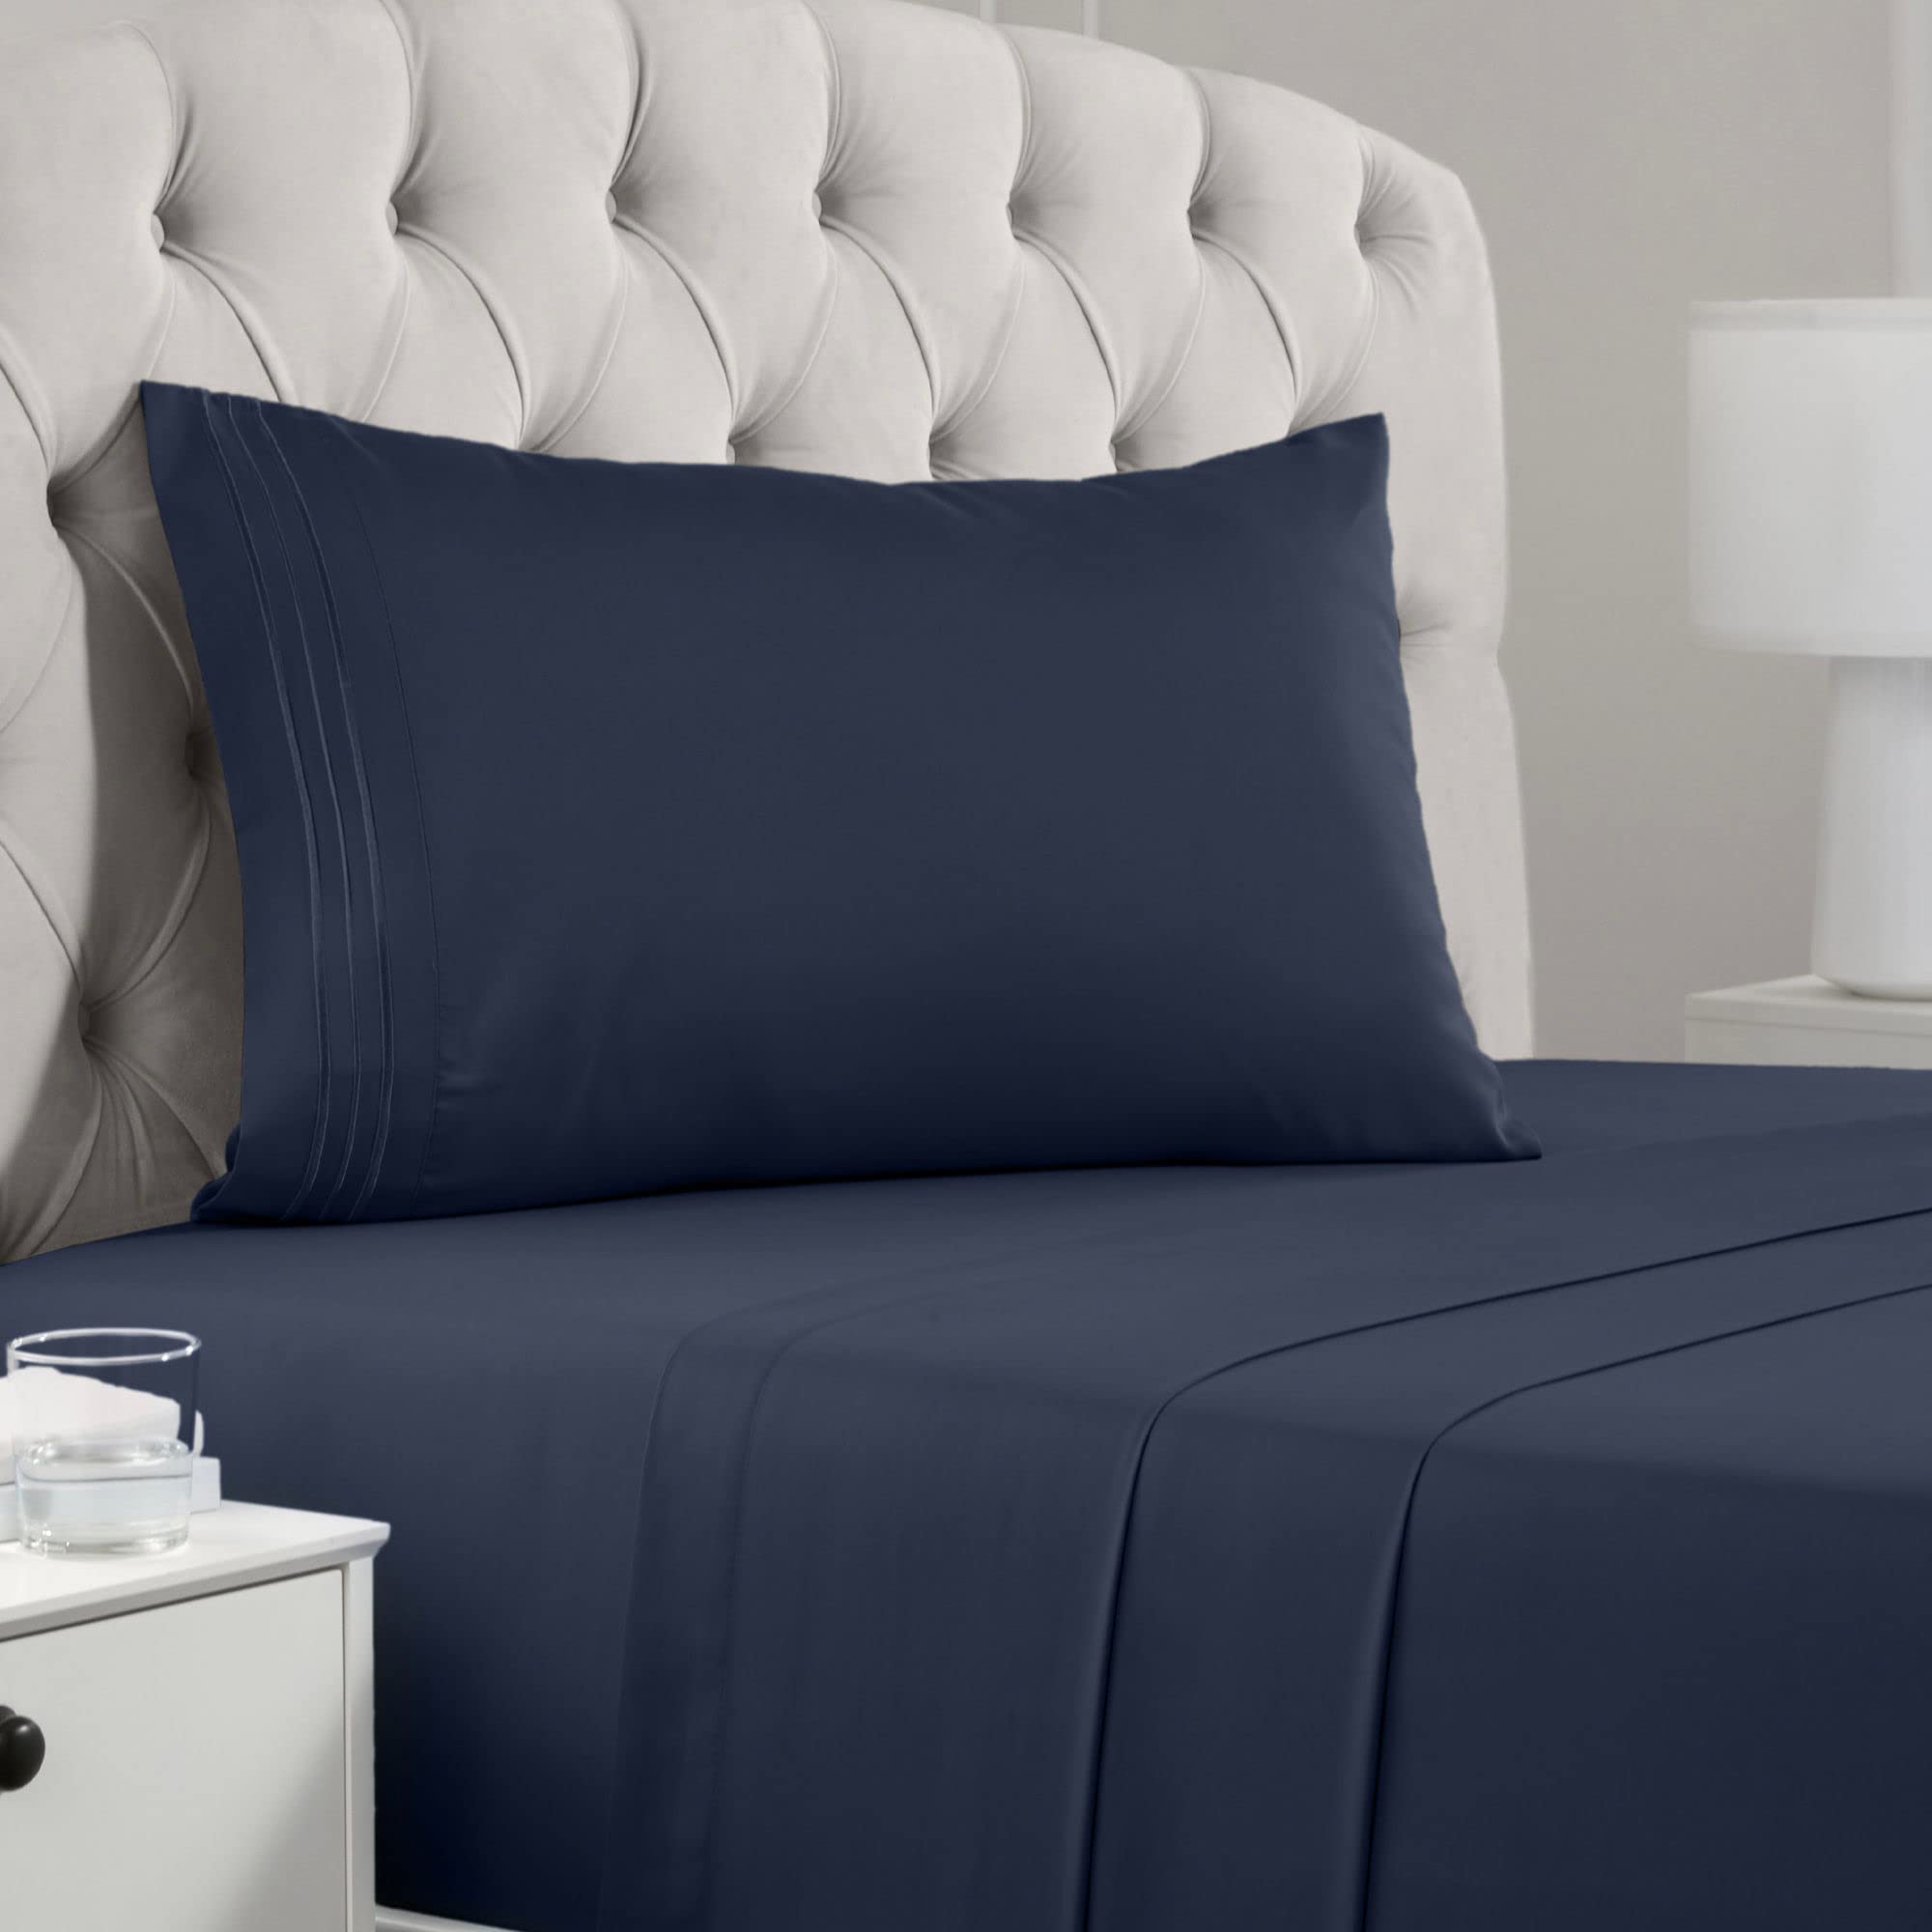 Book Cover Mellanni Twin Sheet Set - 3 Piece Iconic Collection Bedding Sheets & Pillowcases - Luxury, Extra Soft, Cooling Bed Sheets - Deep Pocket up to 16 inch - Wrinkle, Fade, Stain Resistant (Twin, Navy Blue) Twin Navy Blue